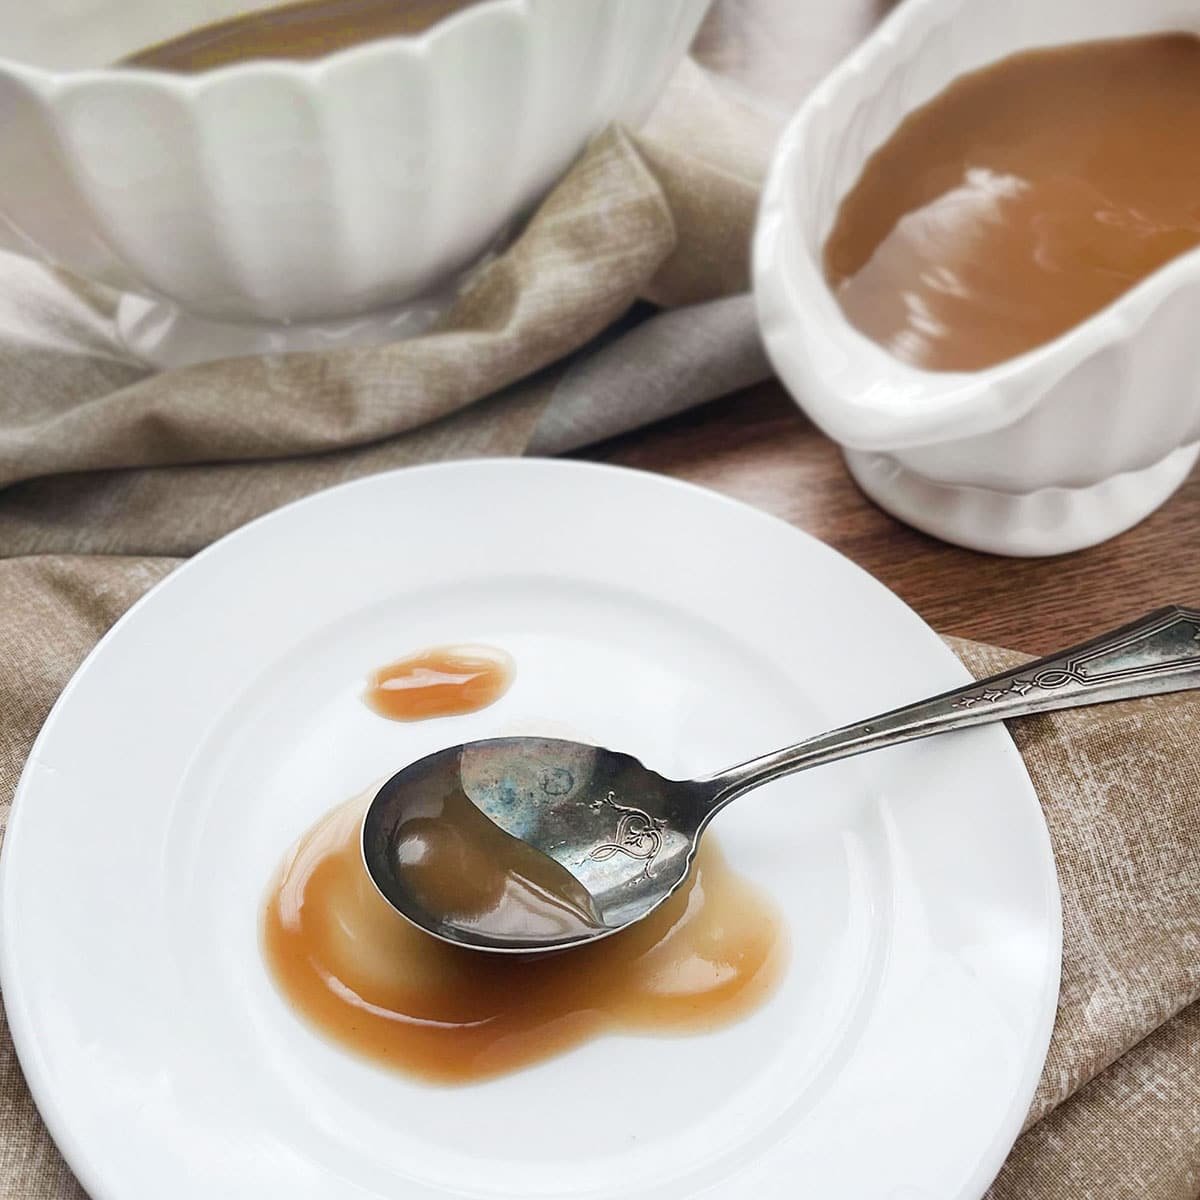 A plate with a smear of light brown gravy on it, a spoon with some gravy on it rests on the plate. A gravy boat with gravy in it is in the background